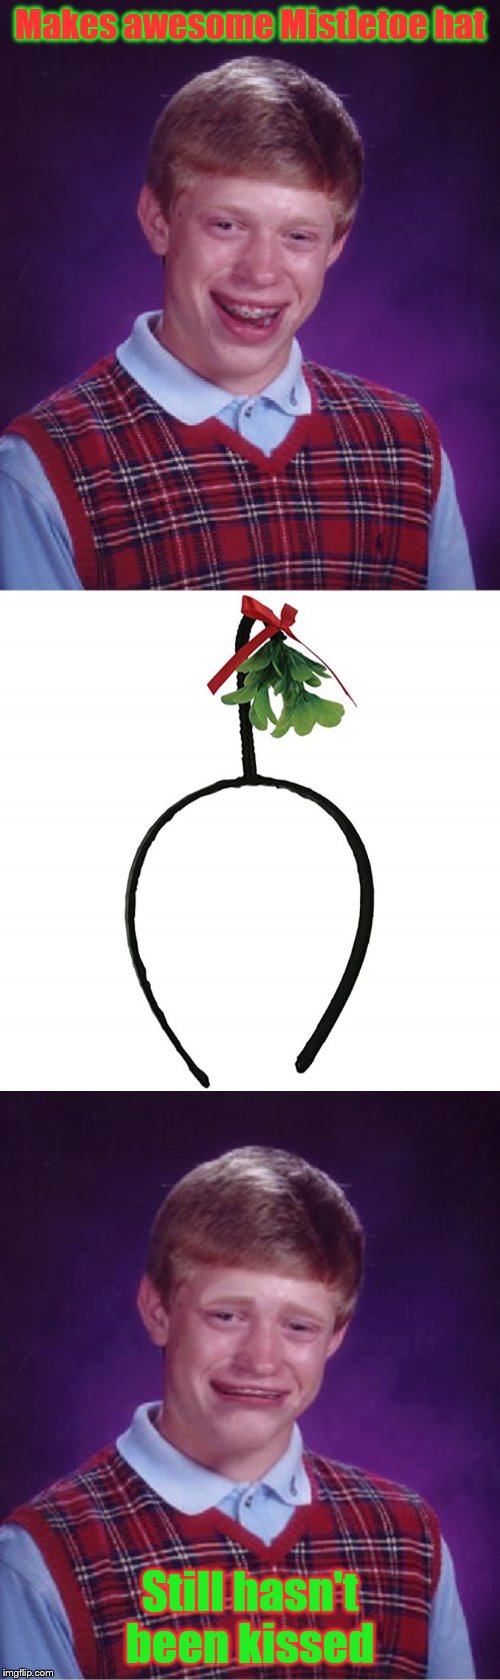 Bad Luck Brian's Christmas Invention | Makes awesome Mistletoe hat; Still hasn't been kissed | image tagged in memes,bad luck brian,bad luck brian cry,mistletoe,kiss,merry christmas | made w/ Imgflip meme maker